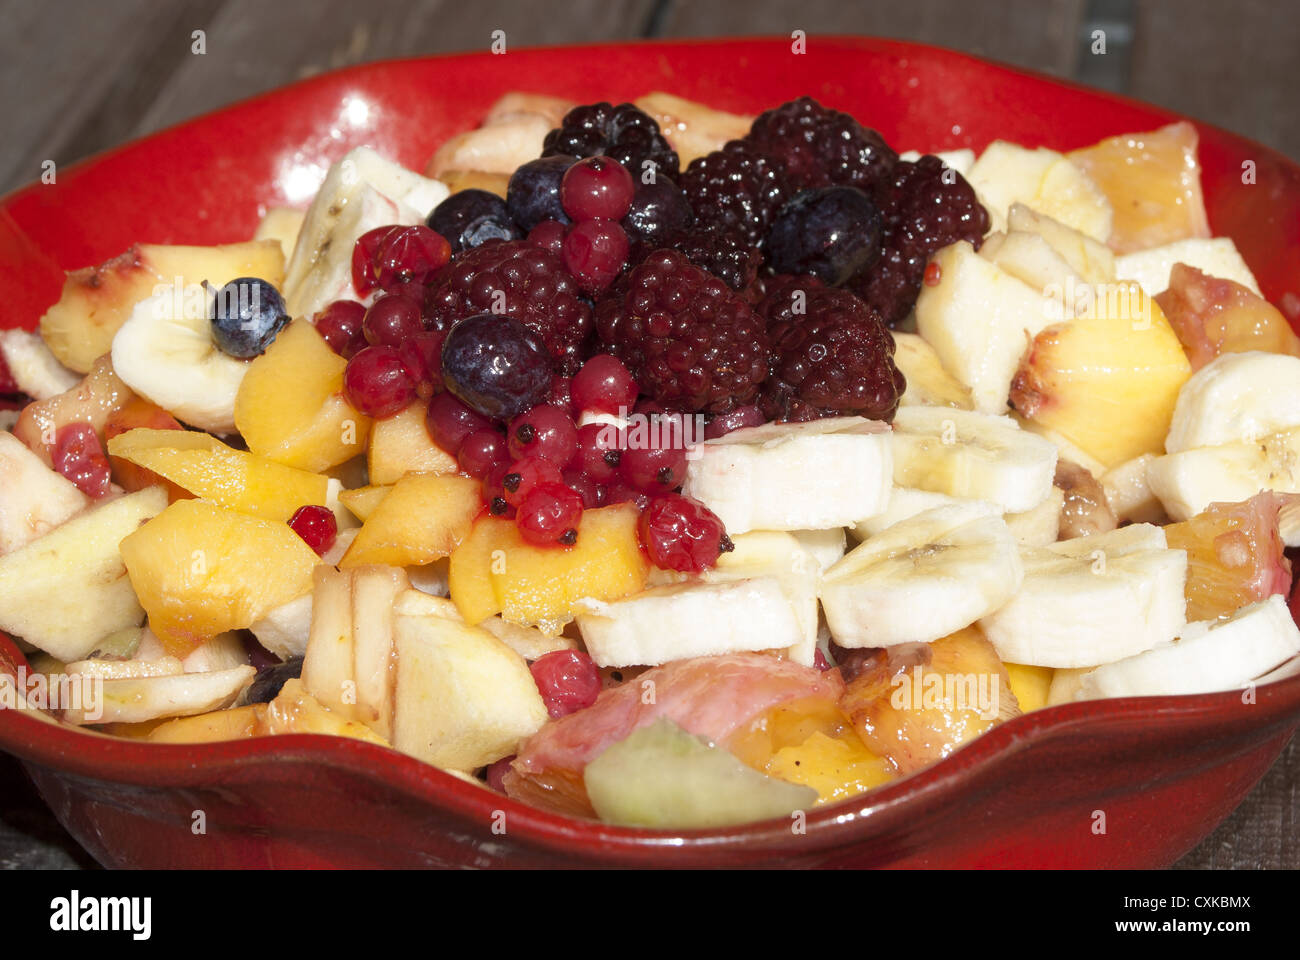 healthy food:fruit salad with fresh fruits Stock Photo